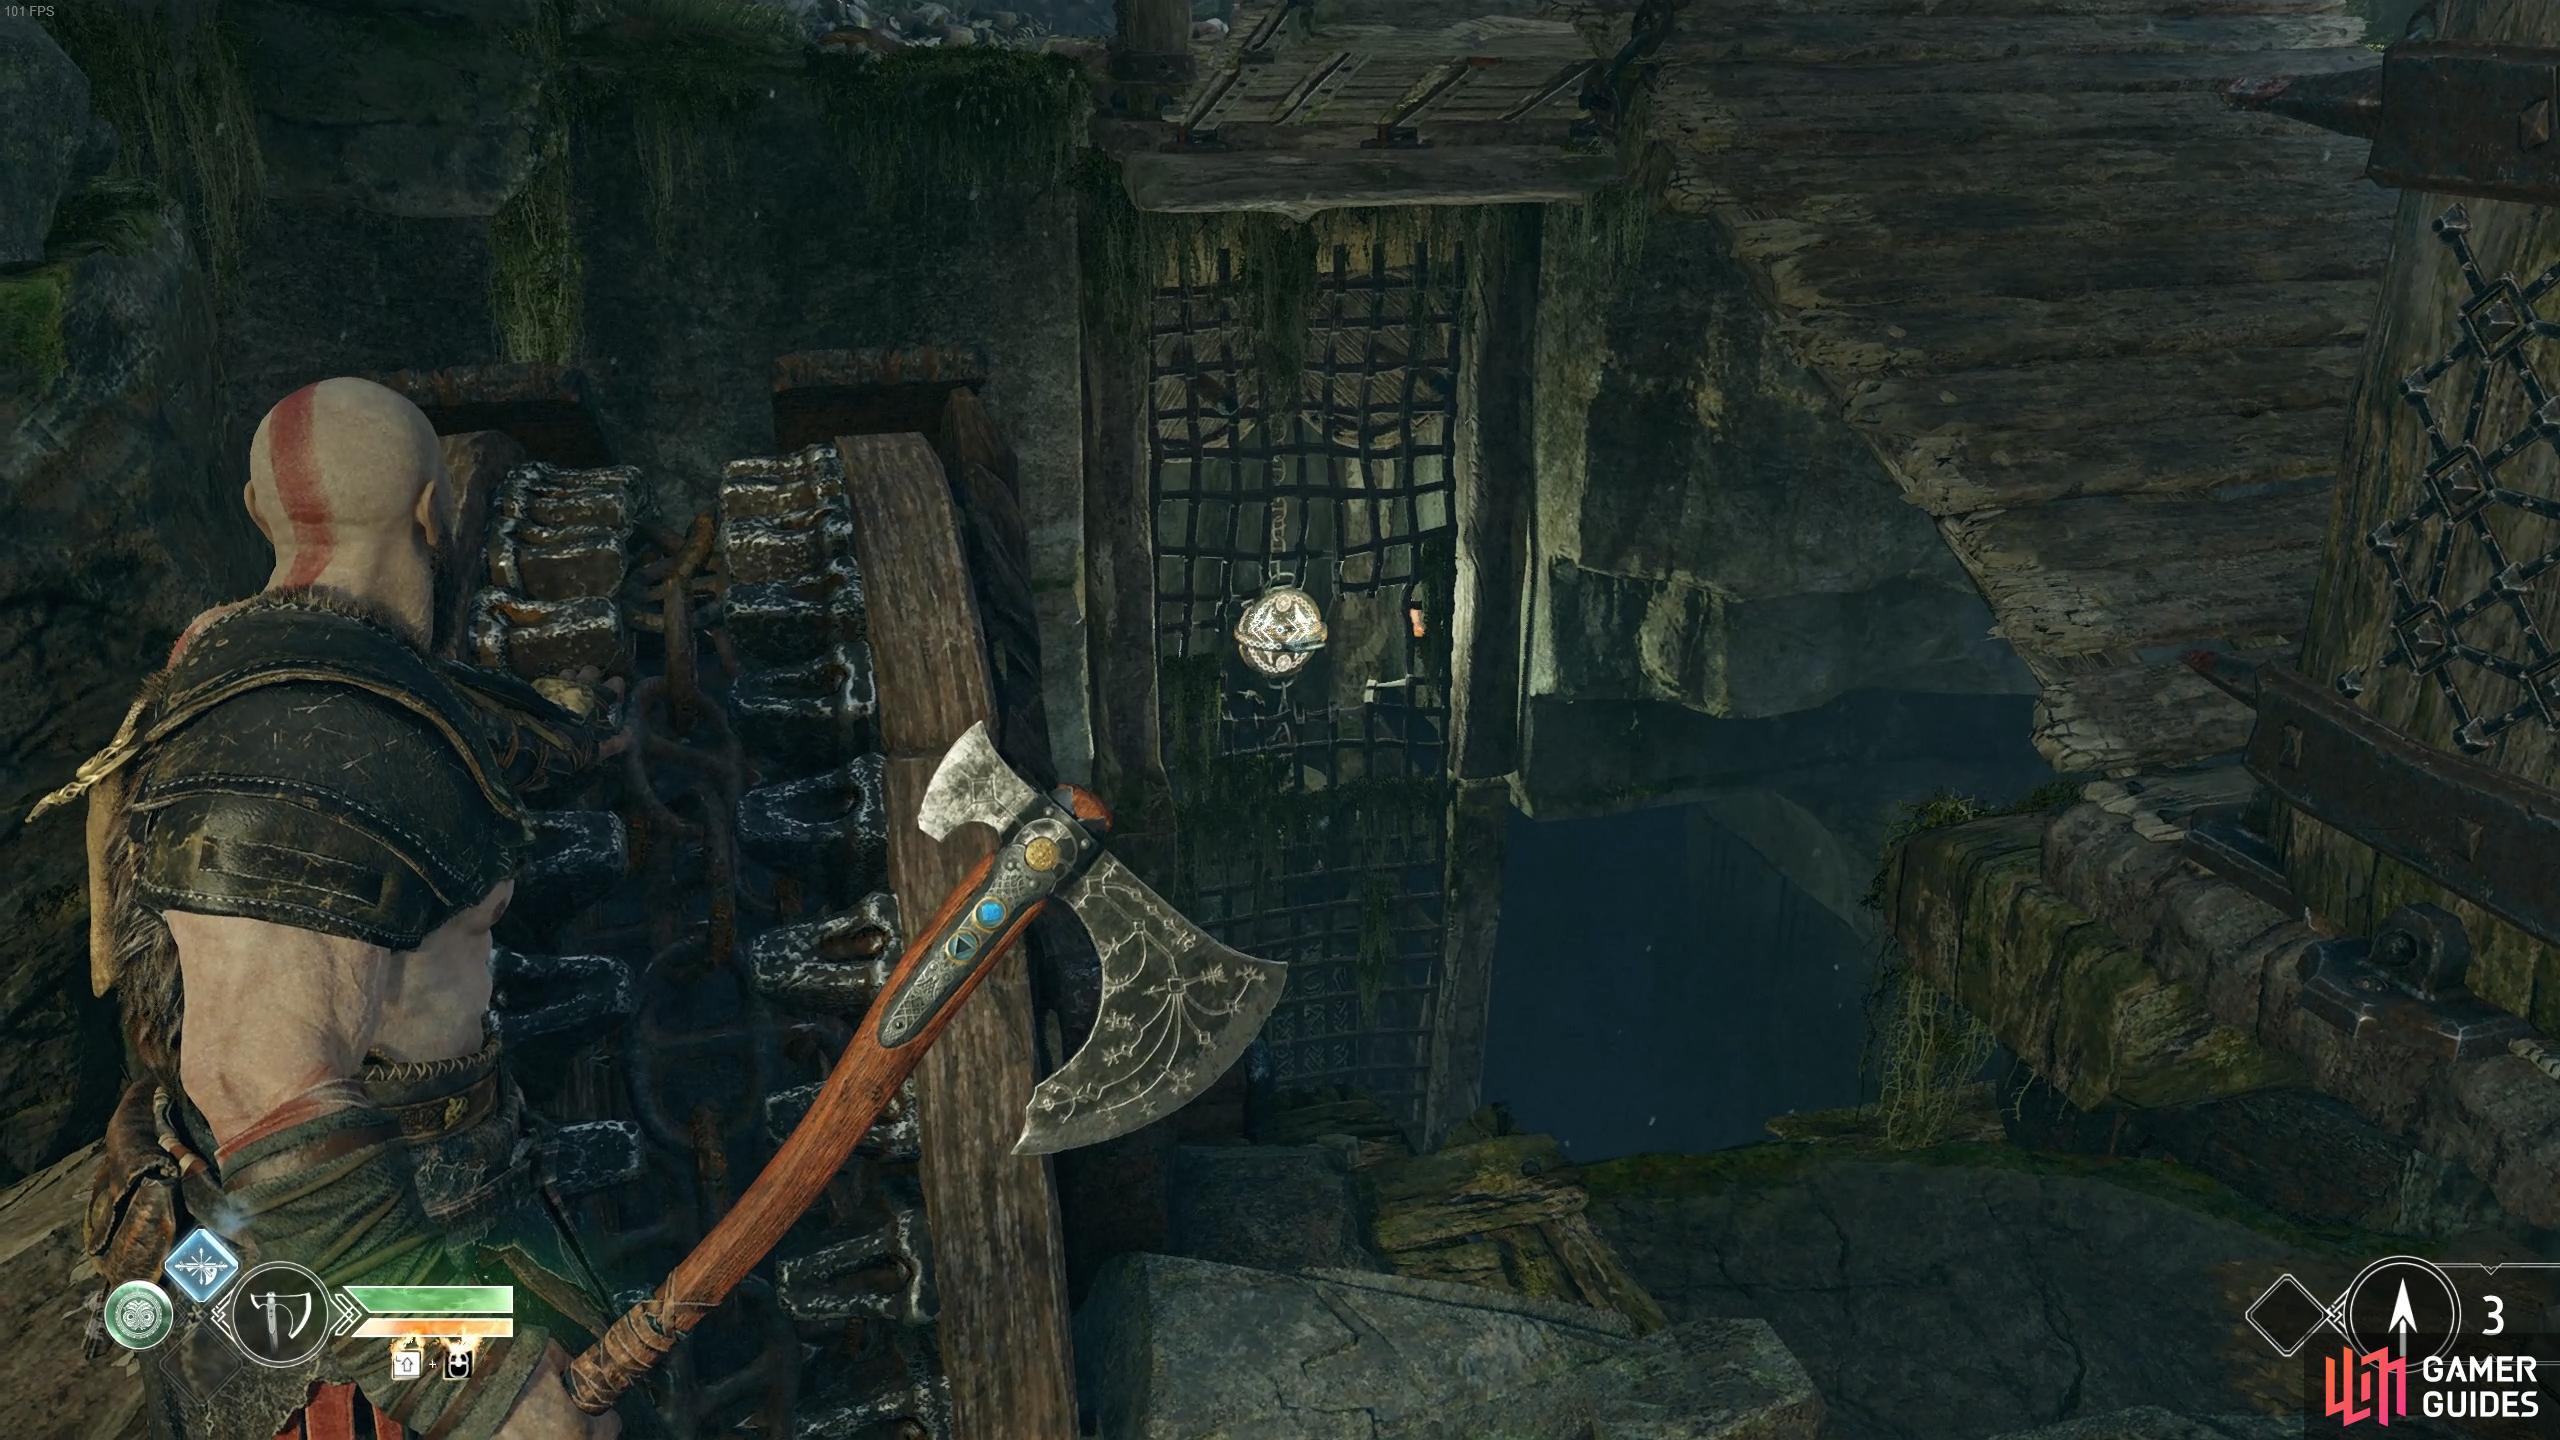 Throw the axe at the symbol when it's revealed through the gap to lower the bridge.